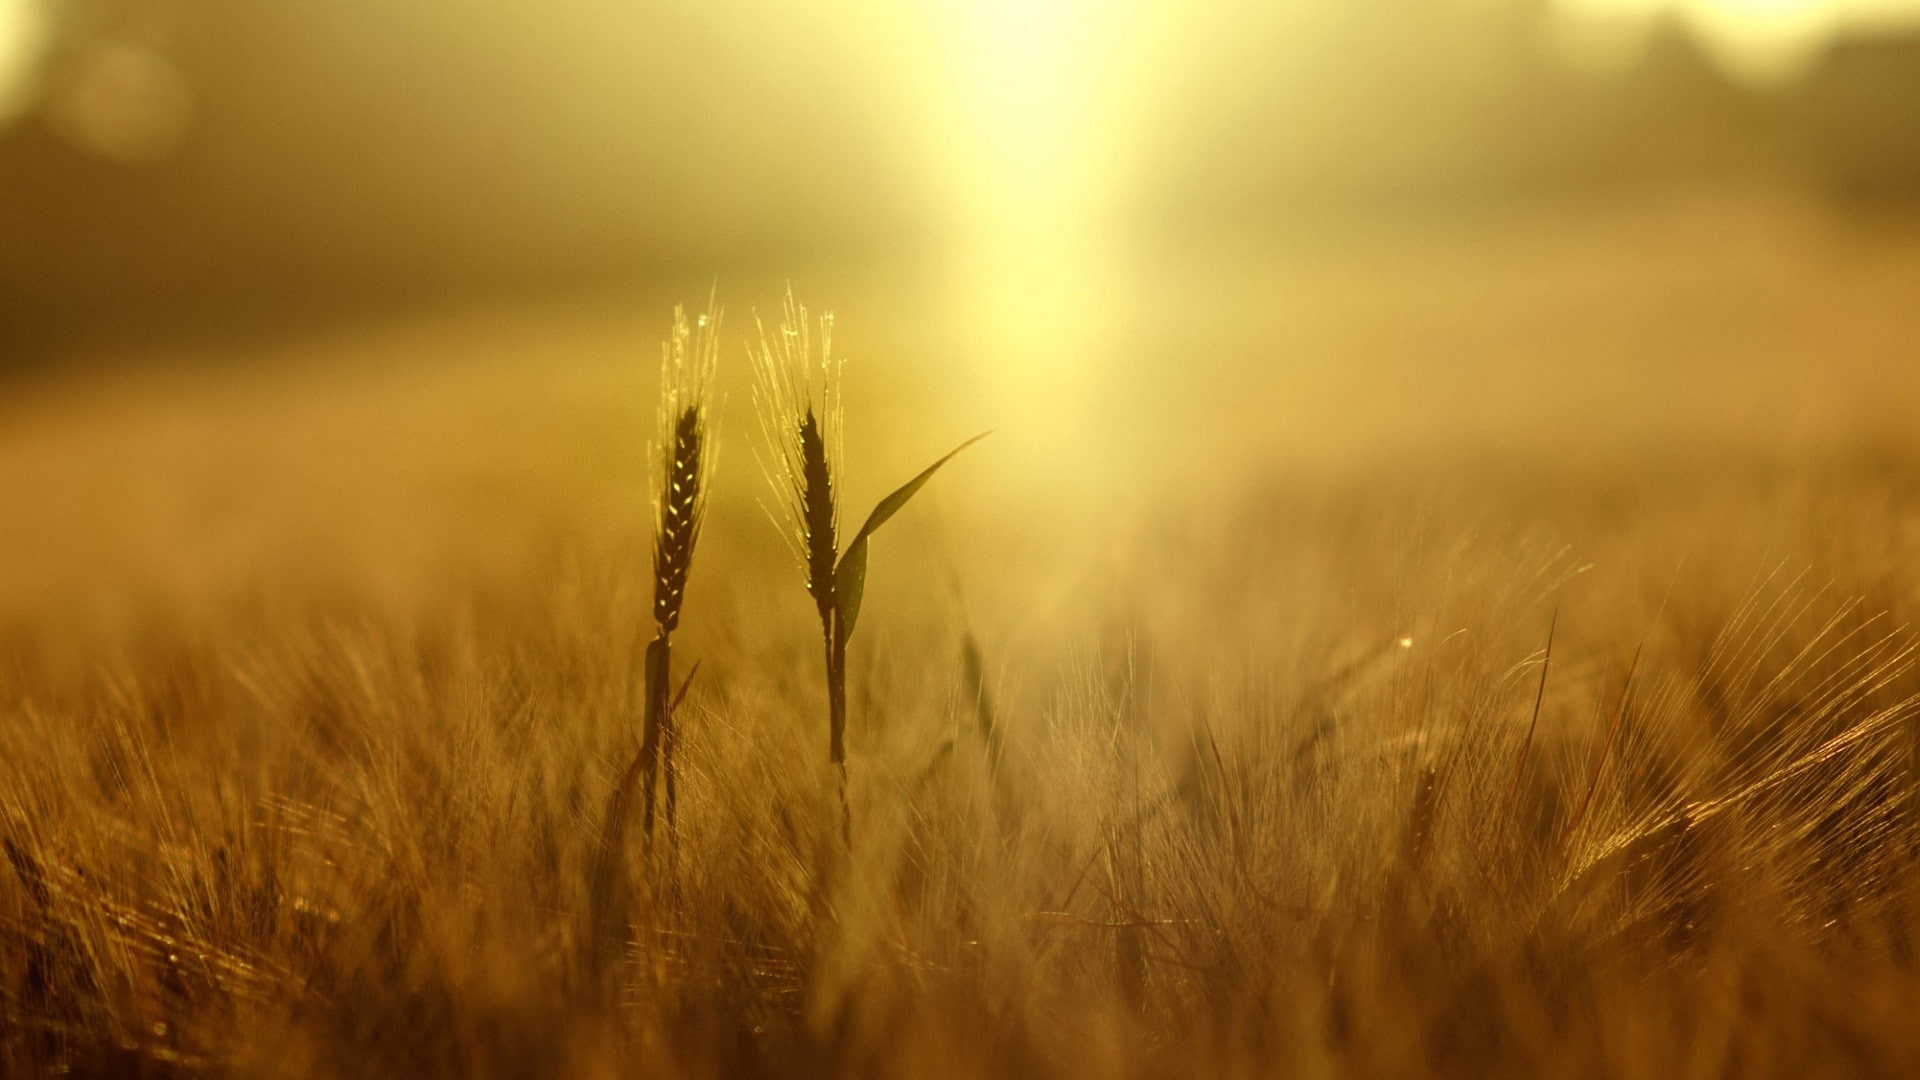 wheat, plants, nature, field, depth of field, yellow, spikelets